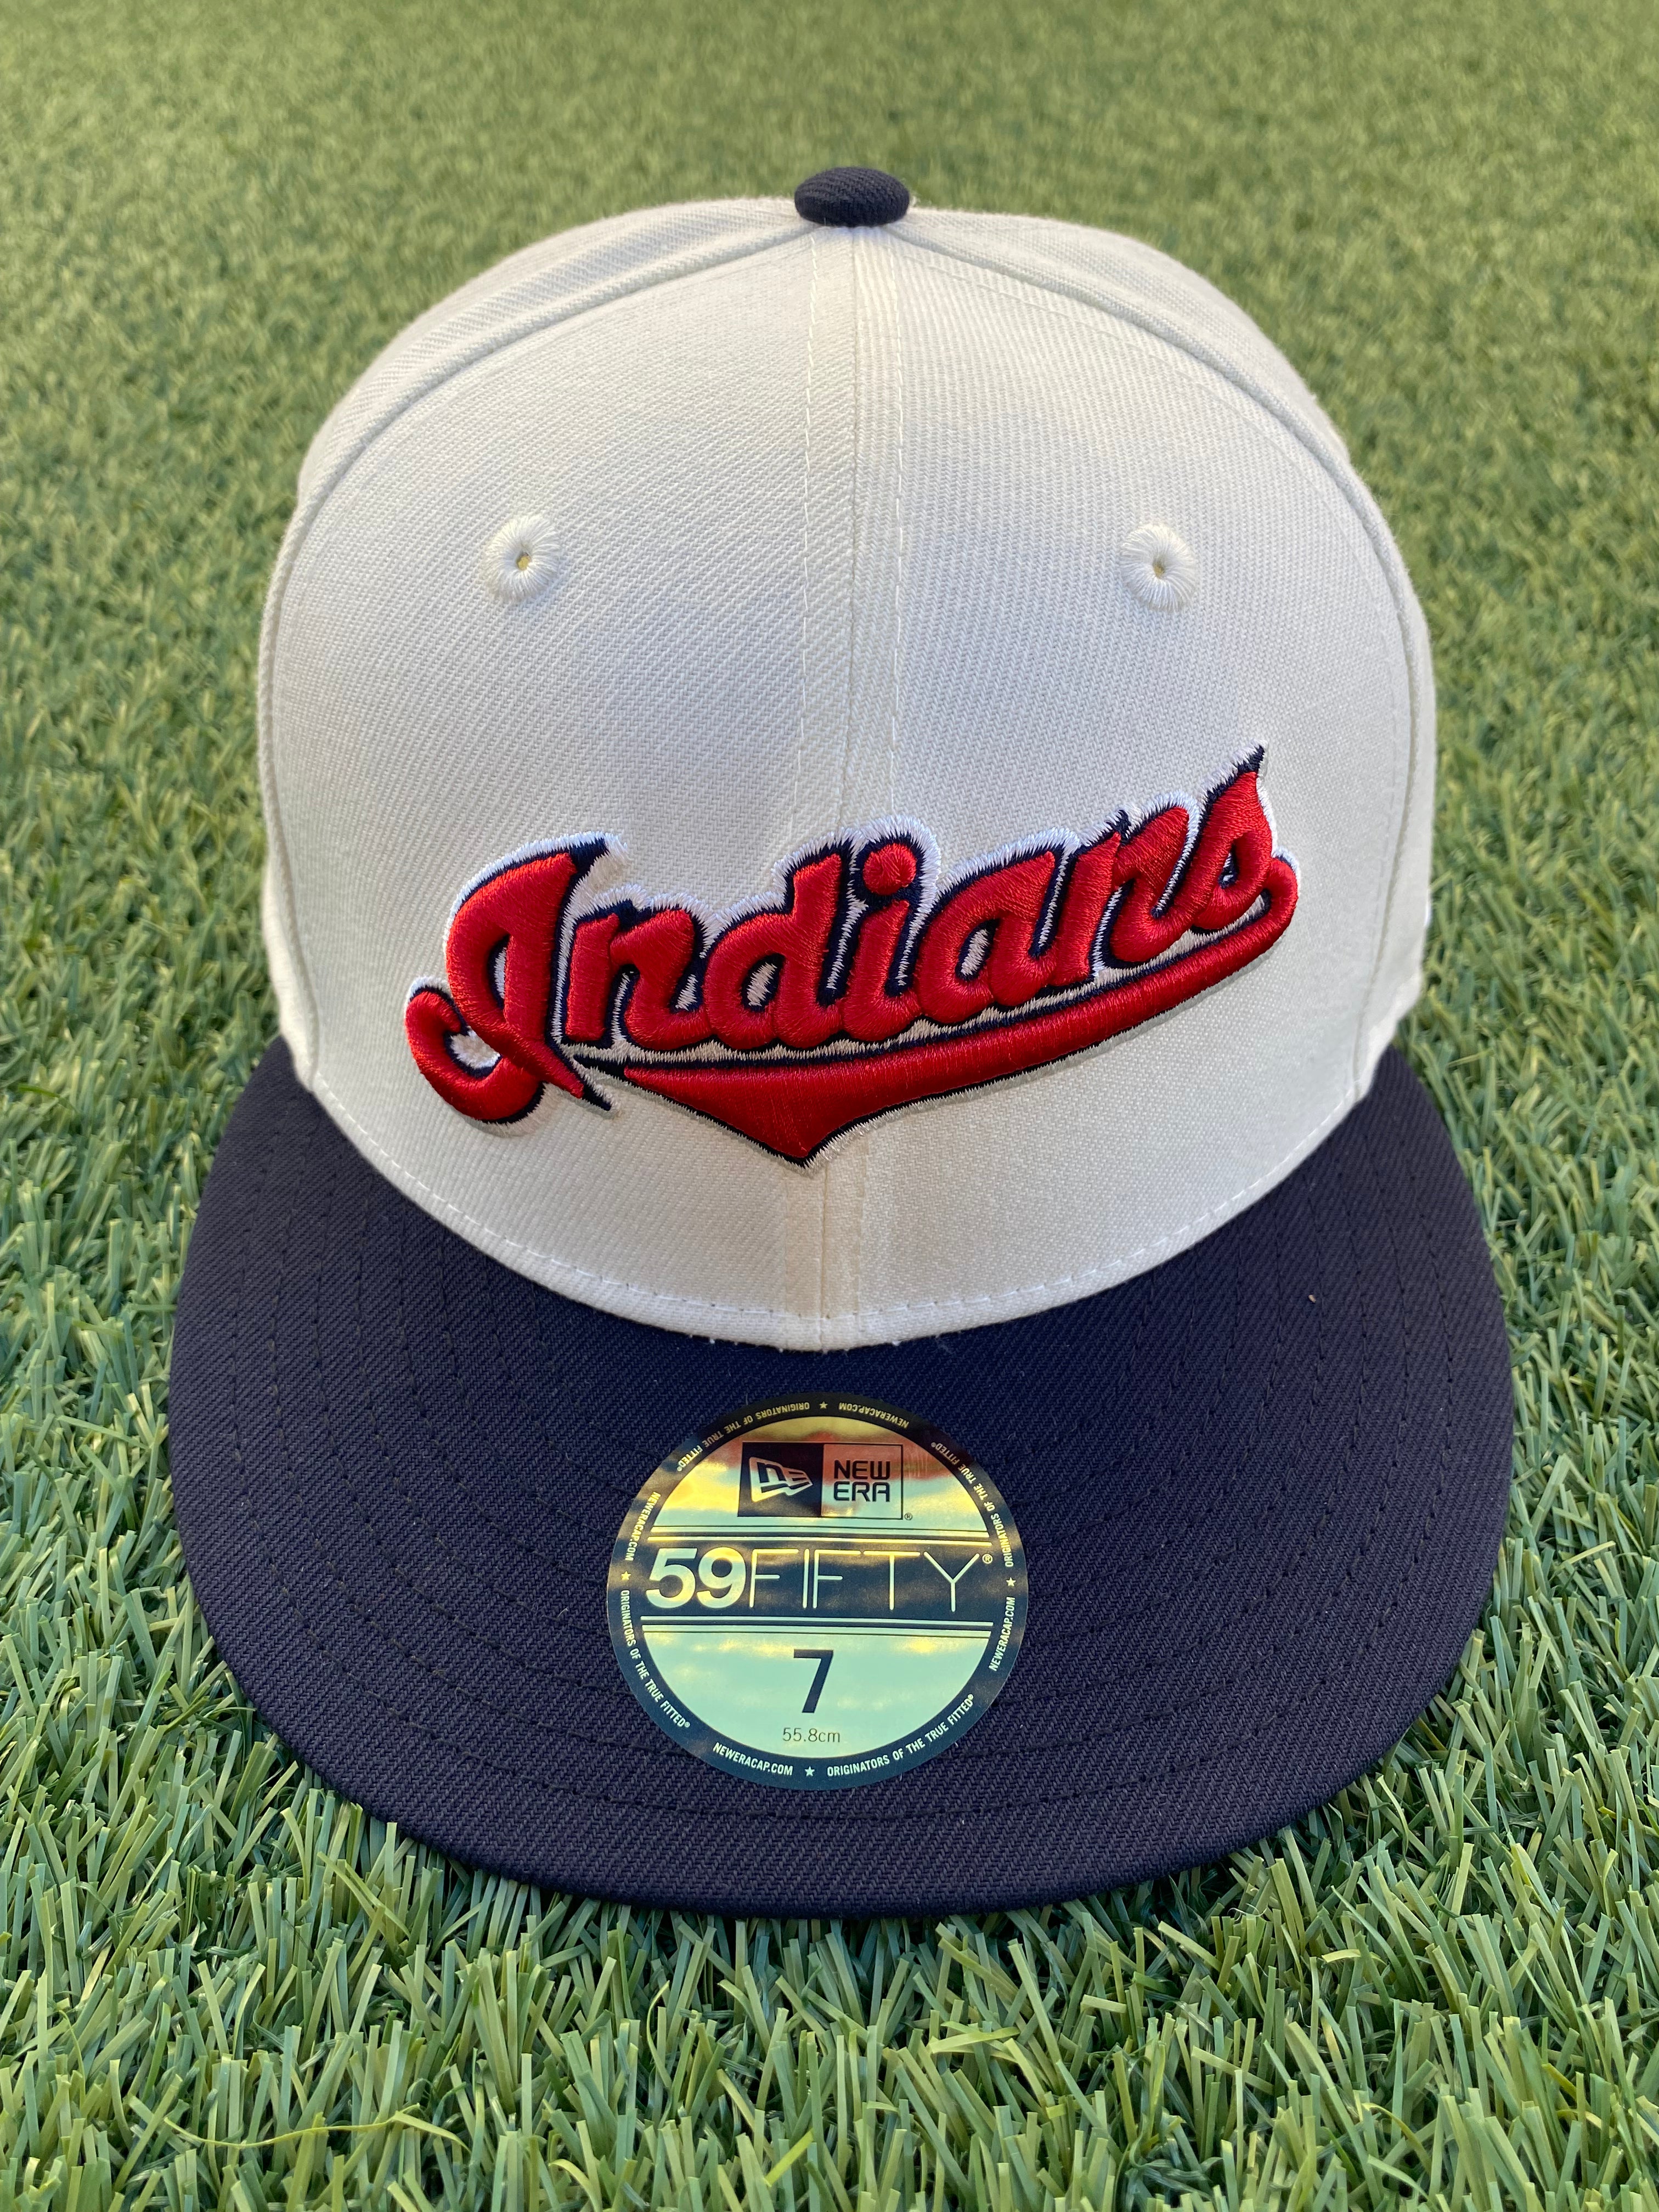 Hat Club Clevland Indians Banned Script 2Tone Jacobs Field Patch Grey Brim